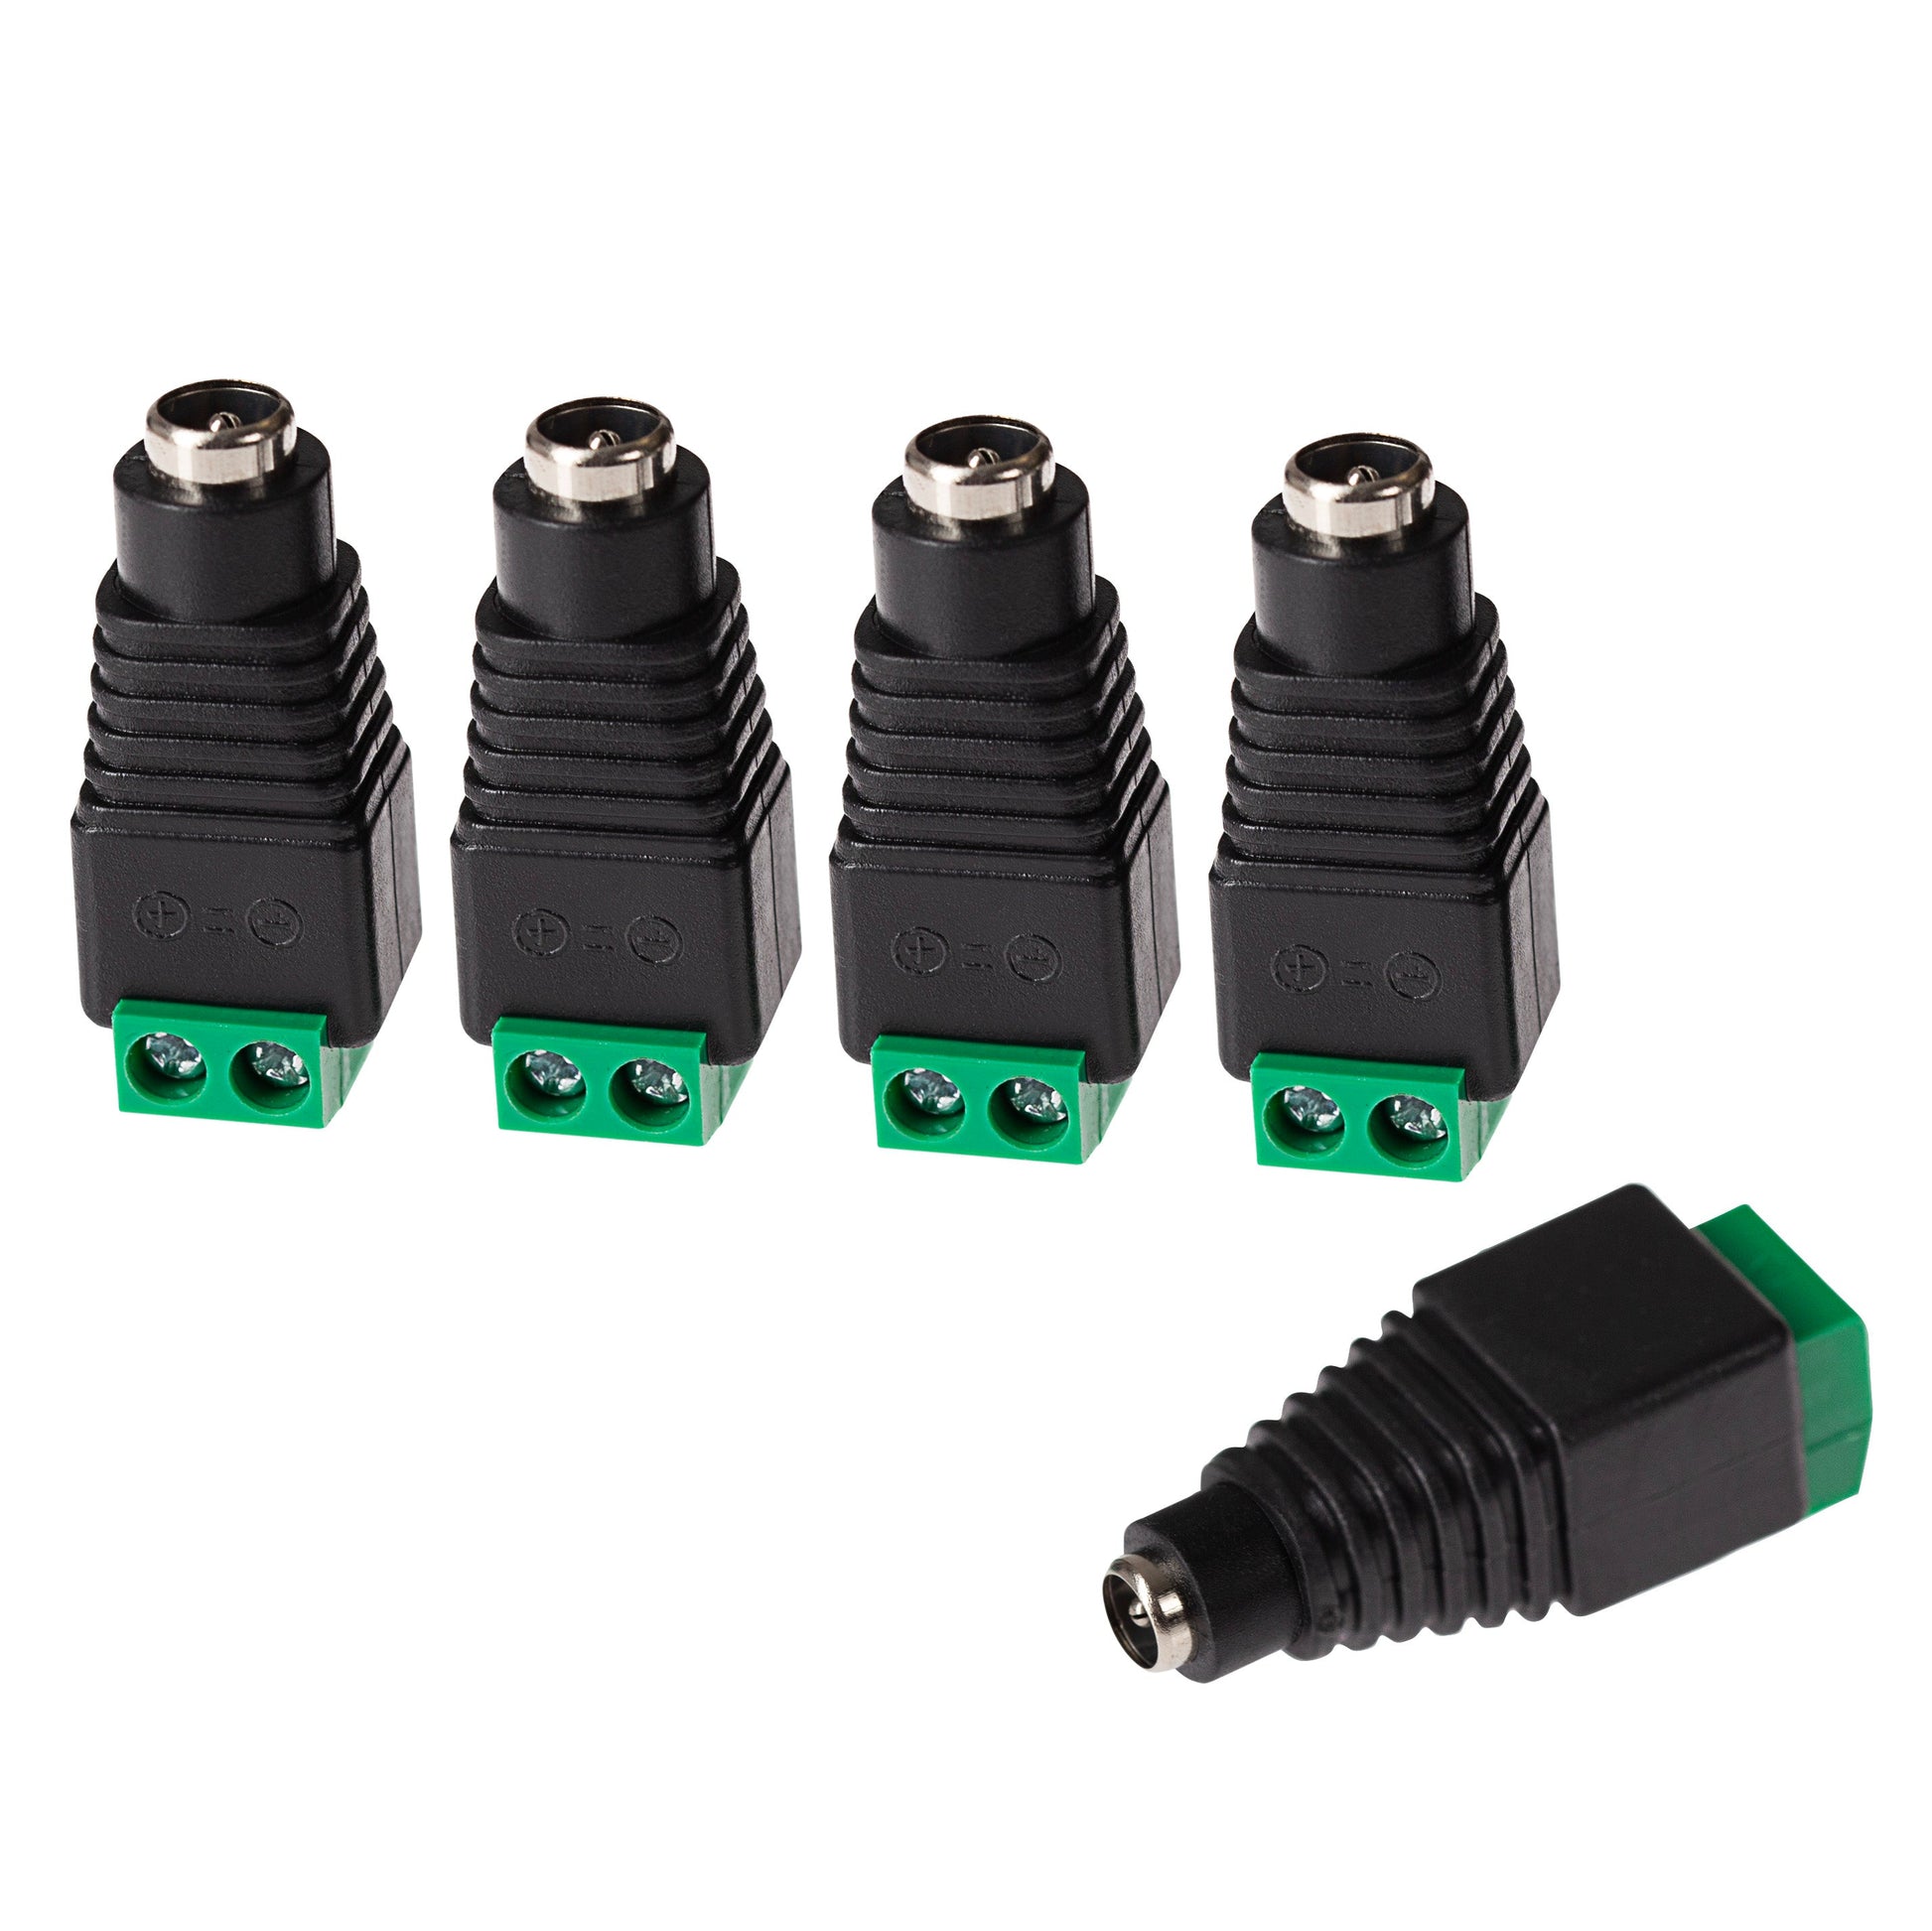 Maplin Female DC to Twin Cable to 5.5 x 2.1mm DC Power Plug for CCTV - Black, Pack of 5 - maplin.co.uk